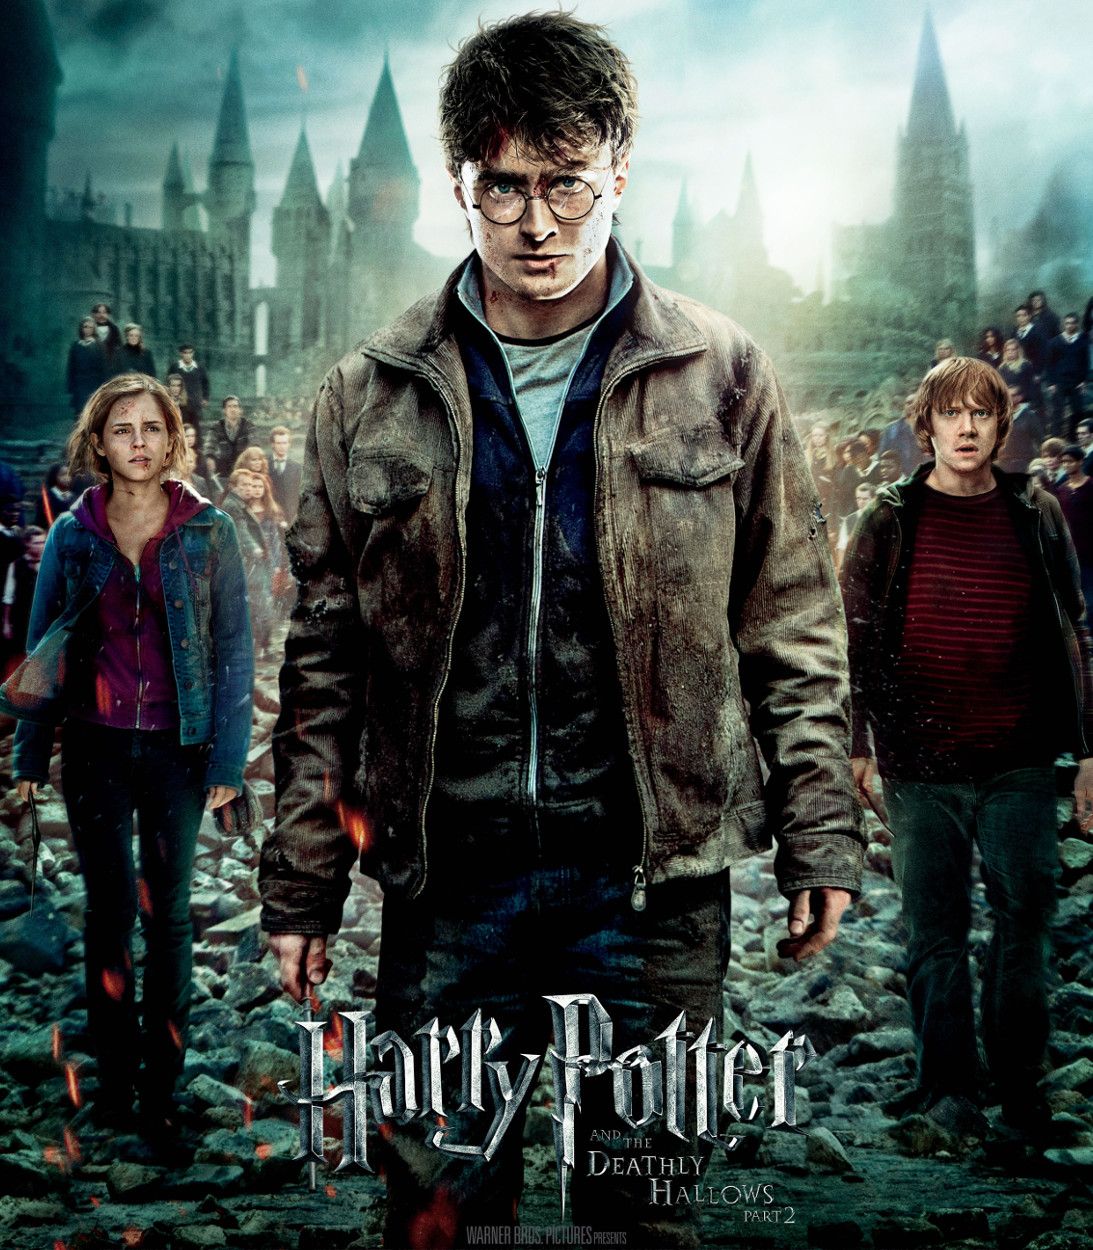 Harry Potter And The Deathly Hallows Part 2 Movie Poster